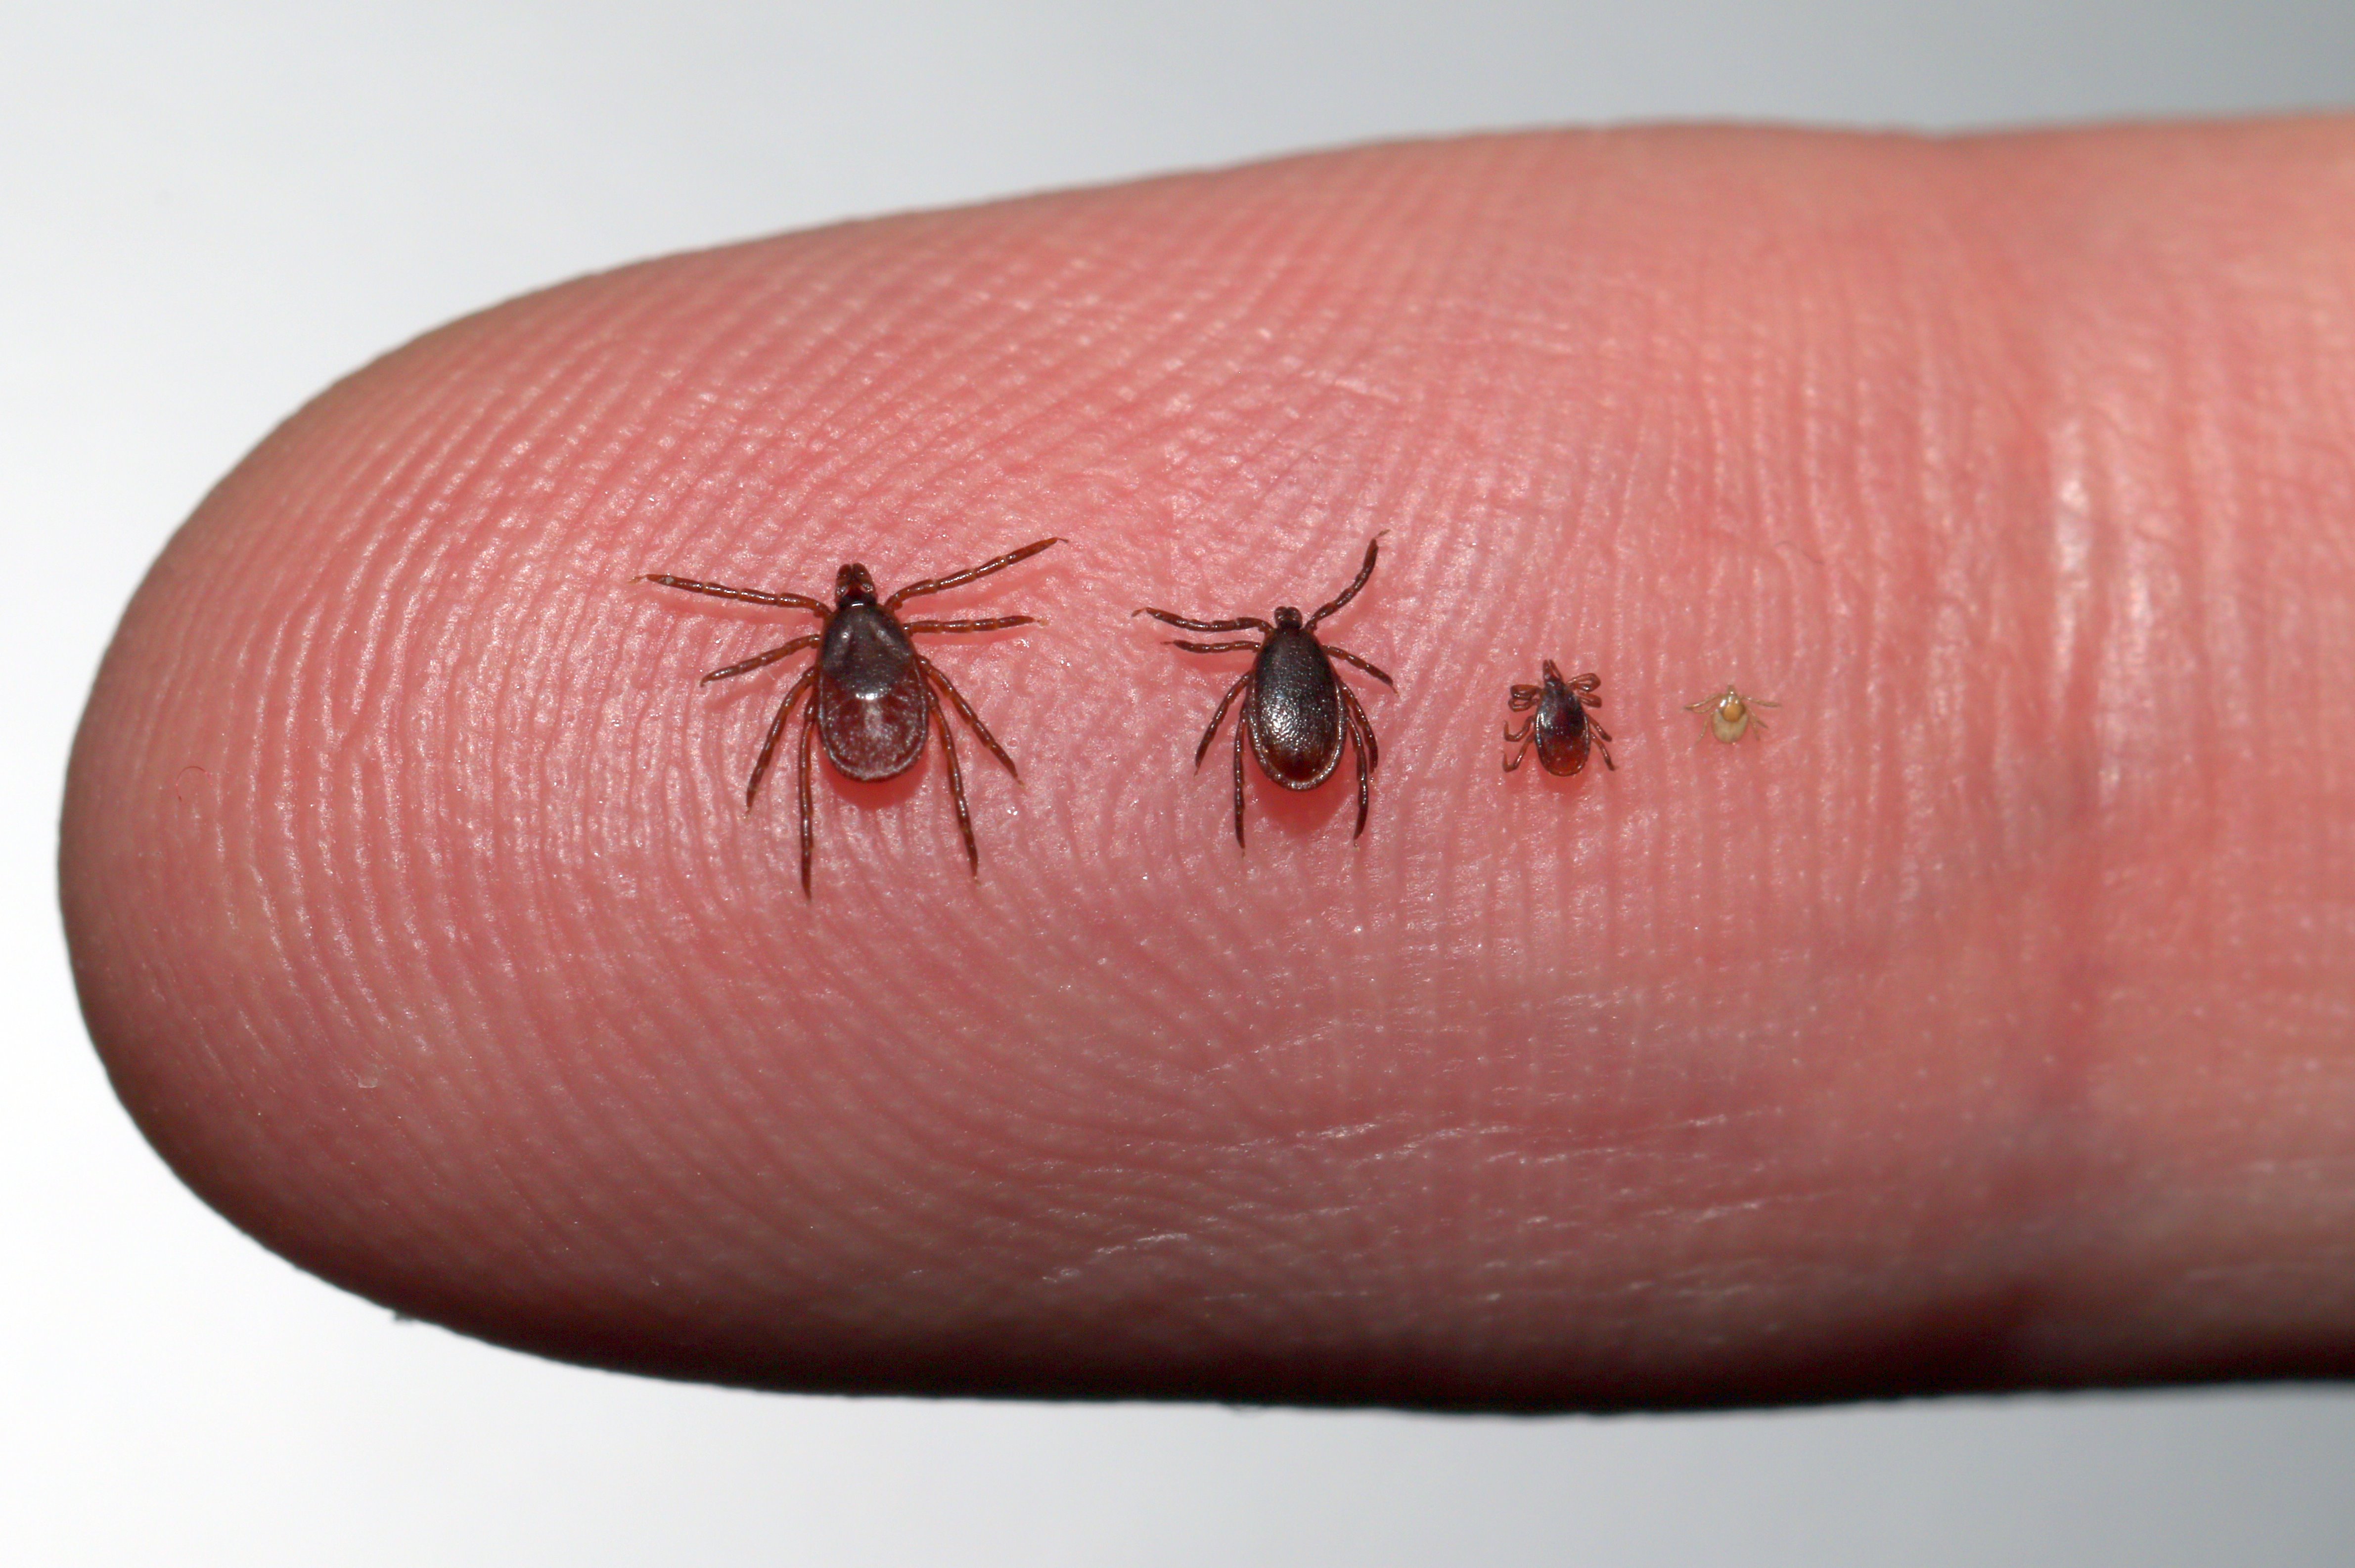 Ixodes scapularis on finger. Left to right: Adult female, adult male, nymph, larva. Photo: Bryan Price, Indiana State Department of Health.